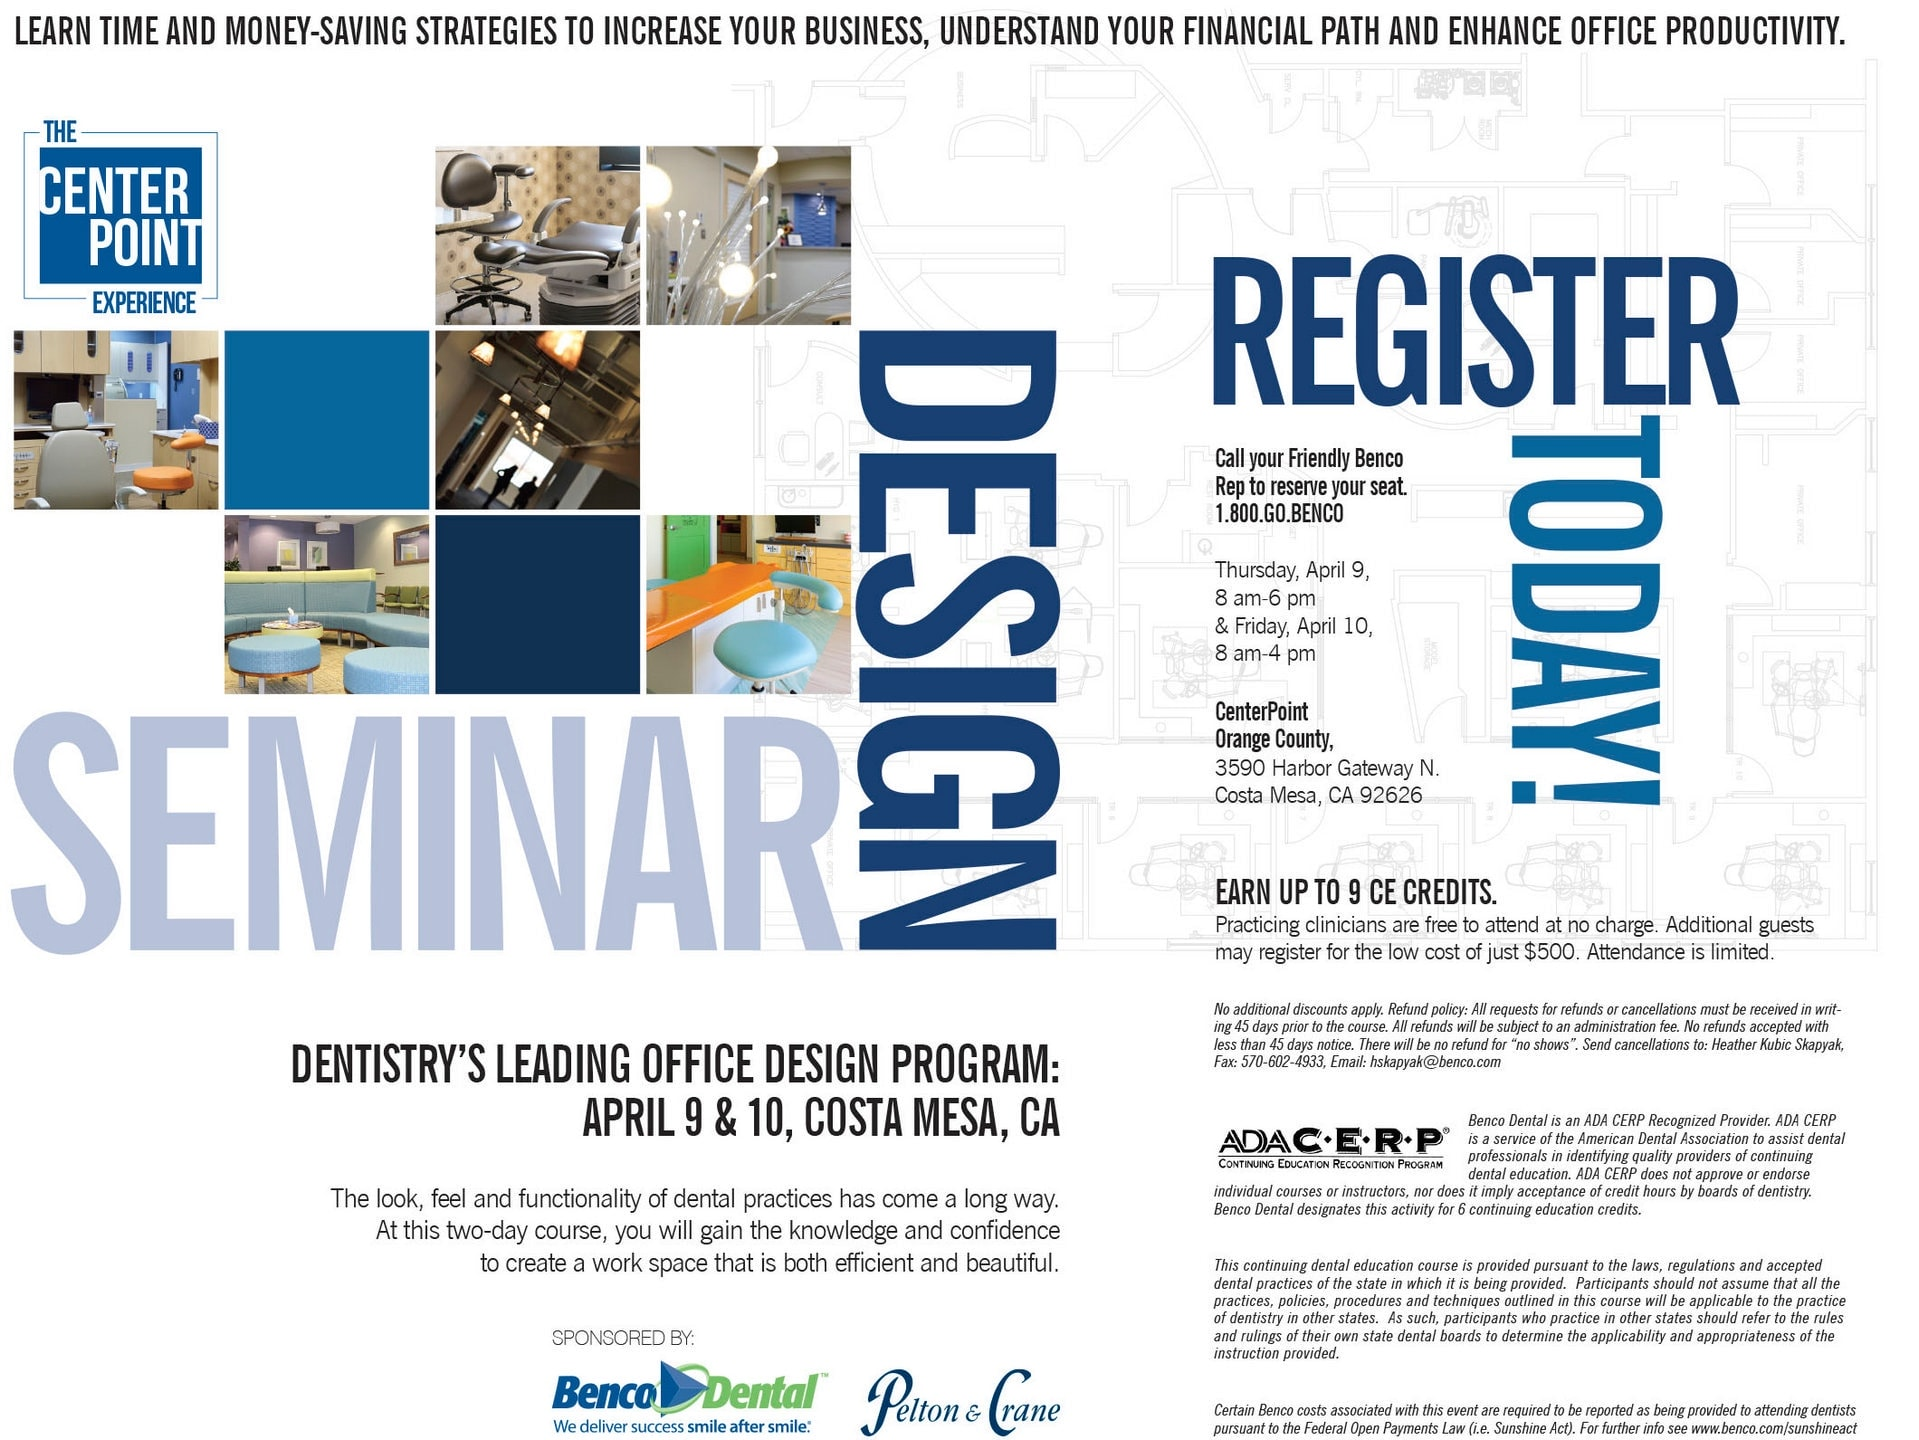 Practicing clinicians are invited to attend Benco Dental's Design Seminar - The CenterPoint Experience- at no charge April 8 and 9 in Costa Mesa, California.